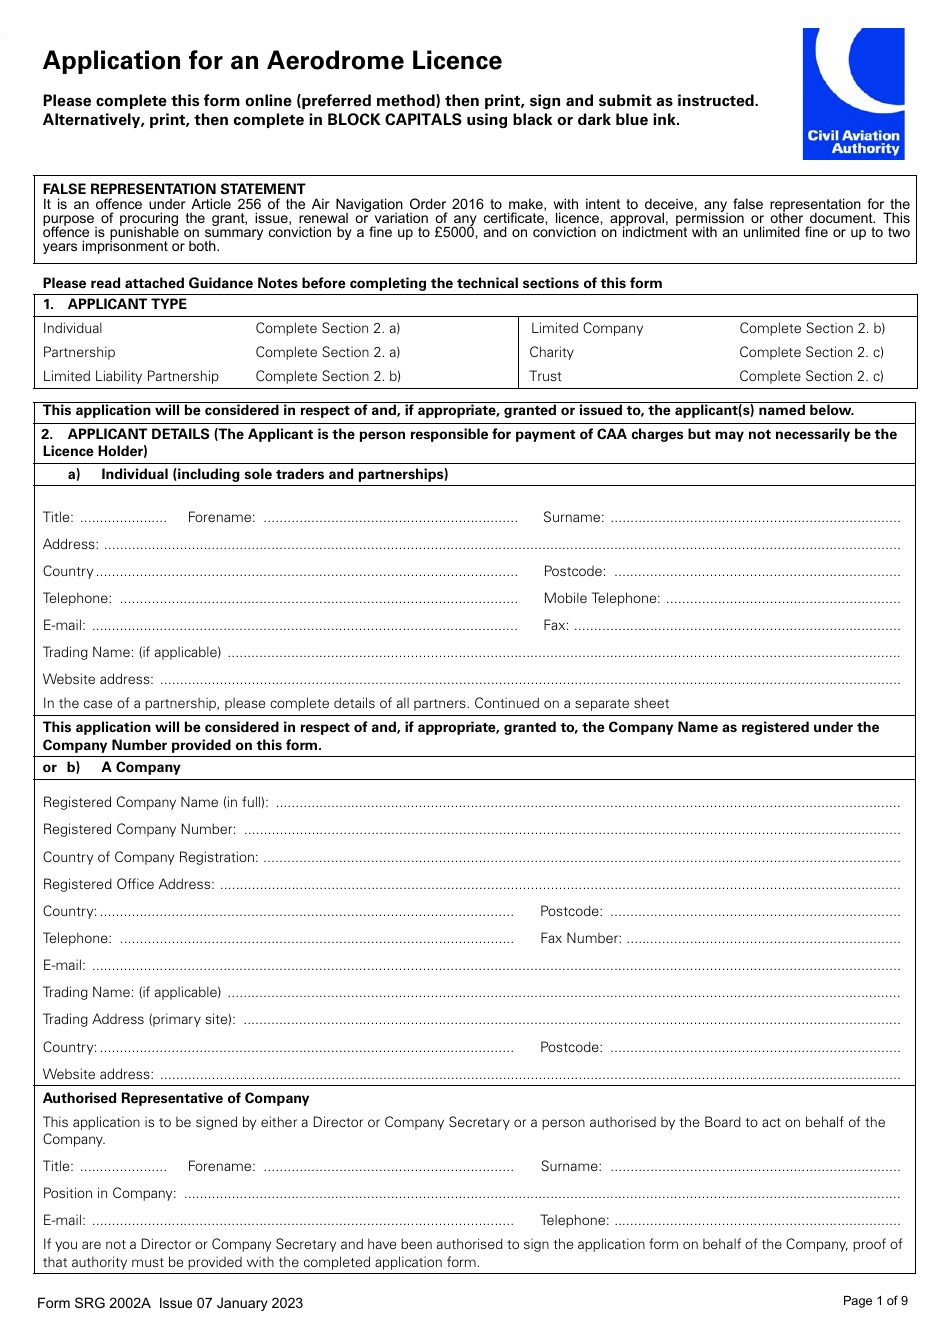 Form SRG2002A Application for an Aerodrome Licence - United Kingdom, Page 1